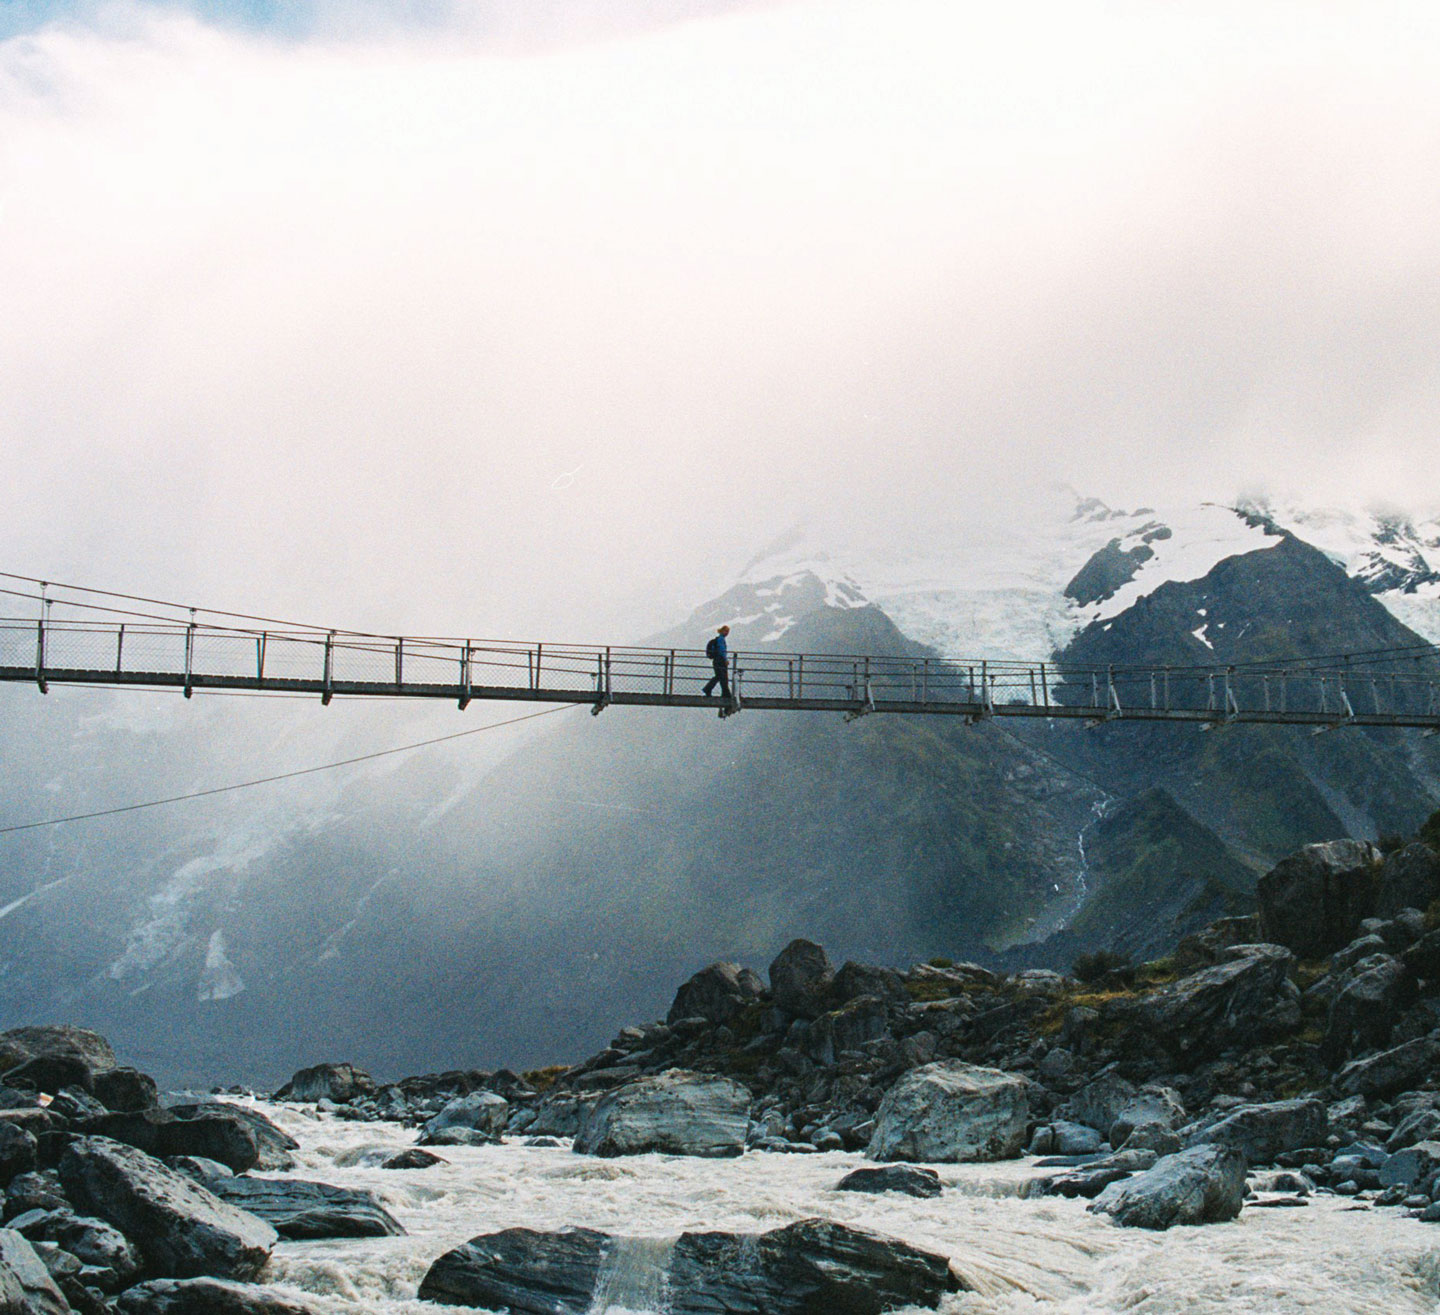 a person walking on a bridge over a river